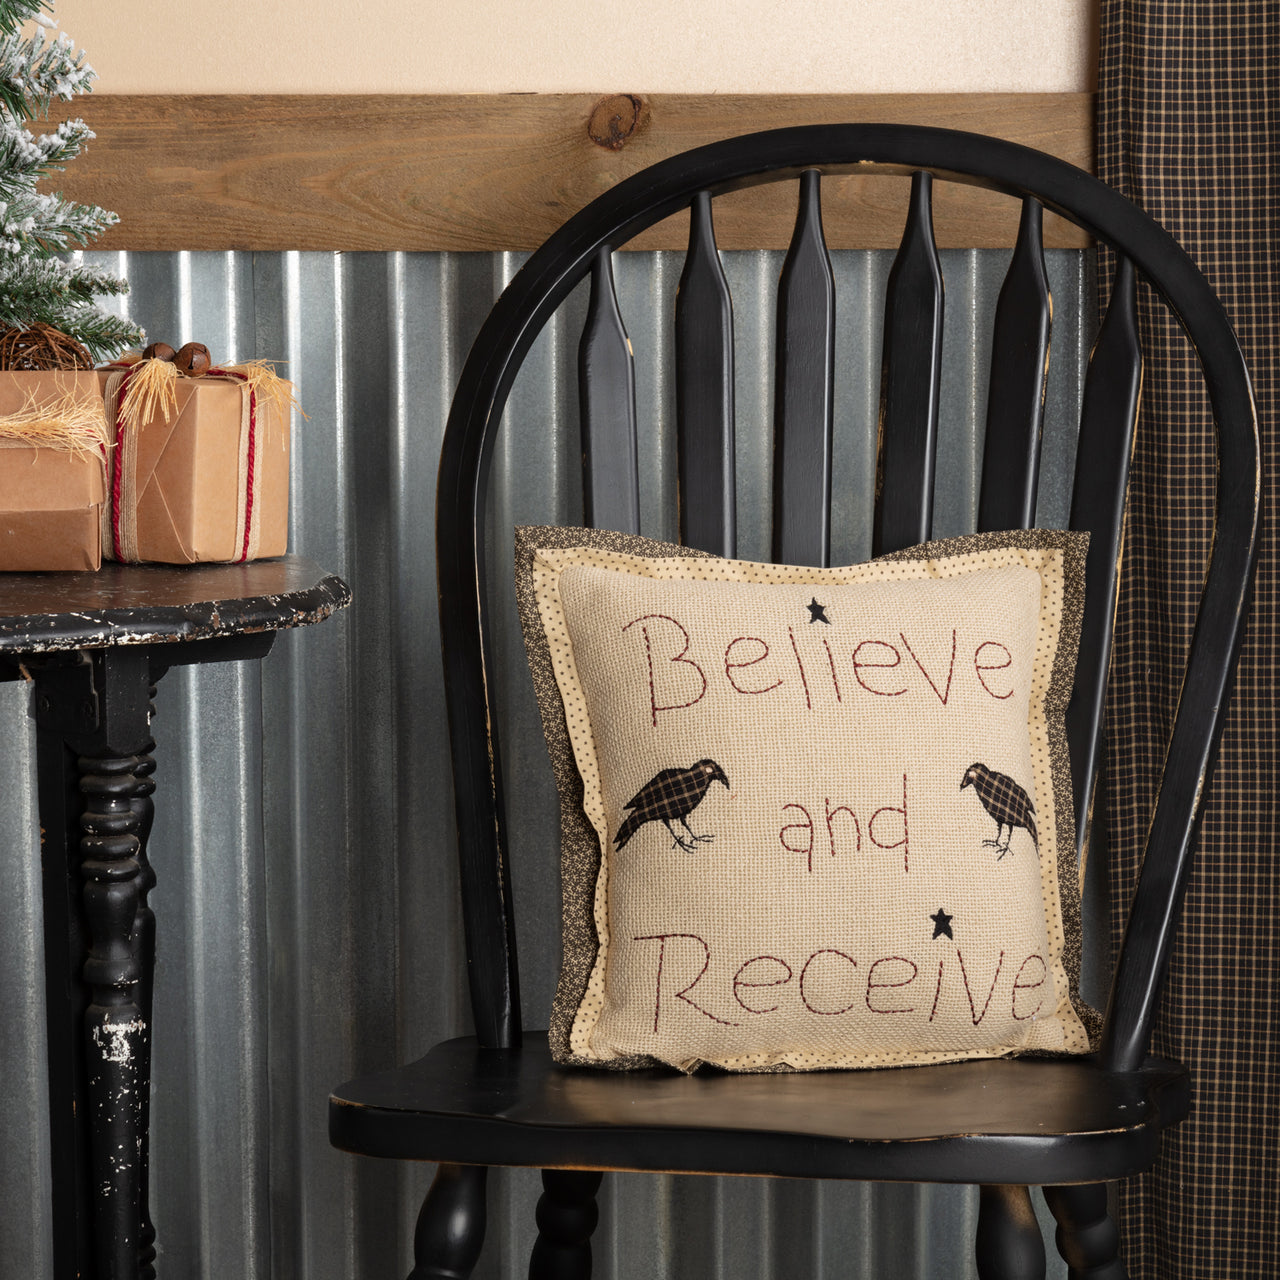 Kettle Grove Believe and Receive Pillow 12x12 VHC Brands